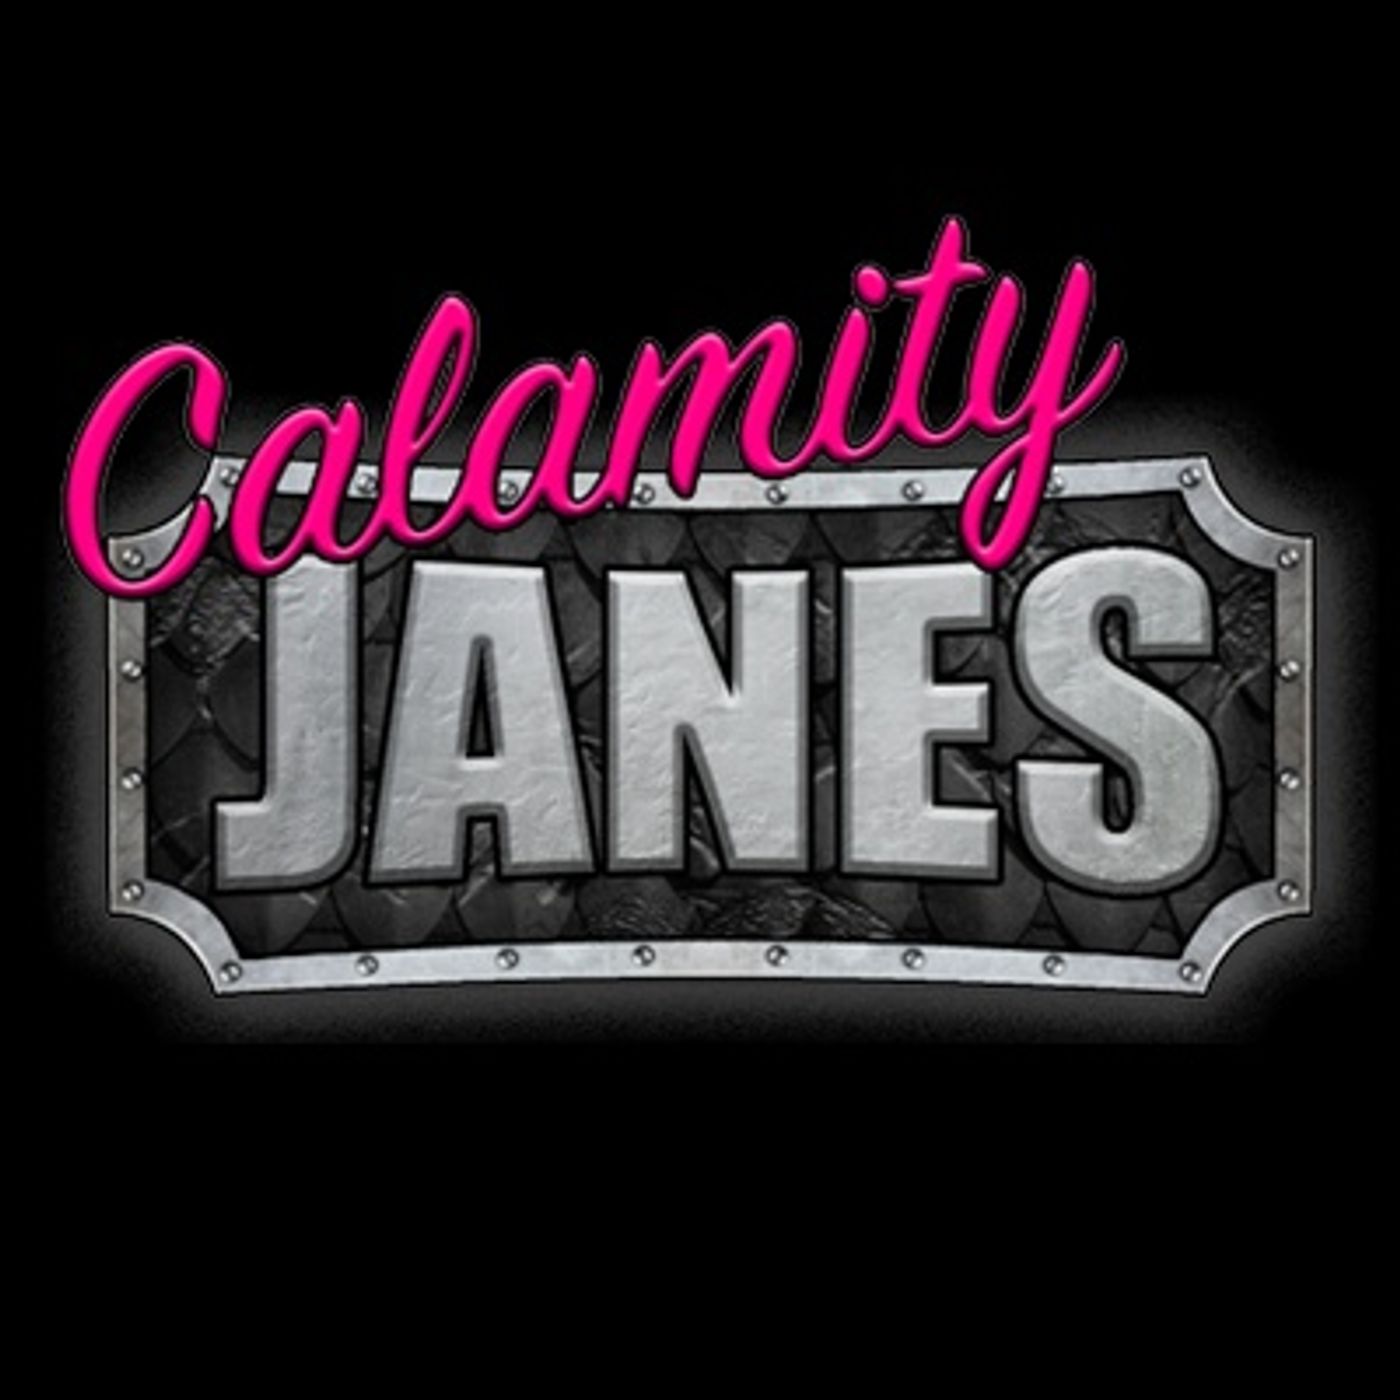 Calamity Janes S02 E06: When You’re a Jane